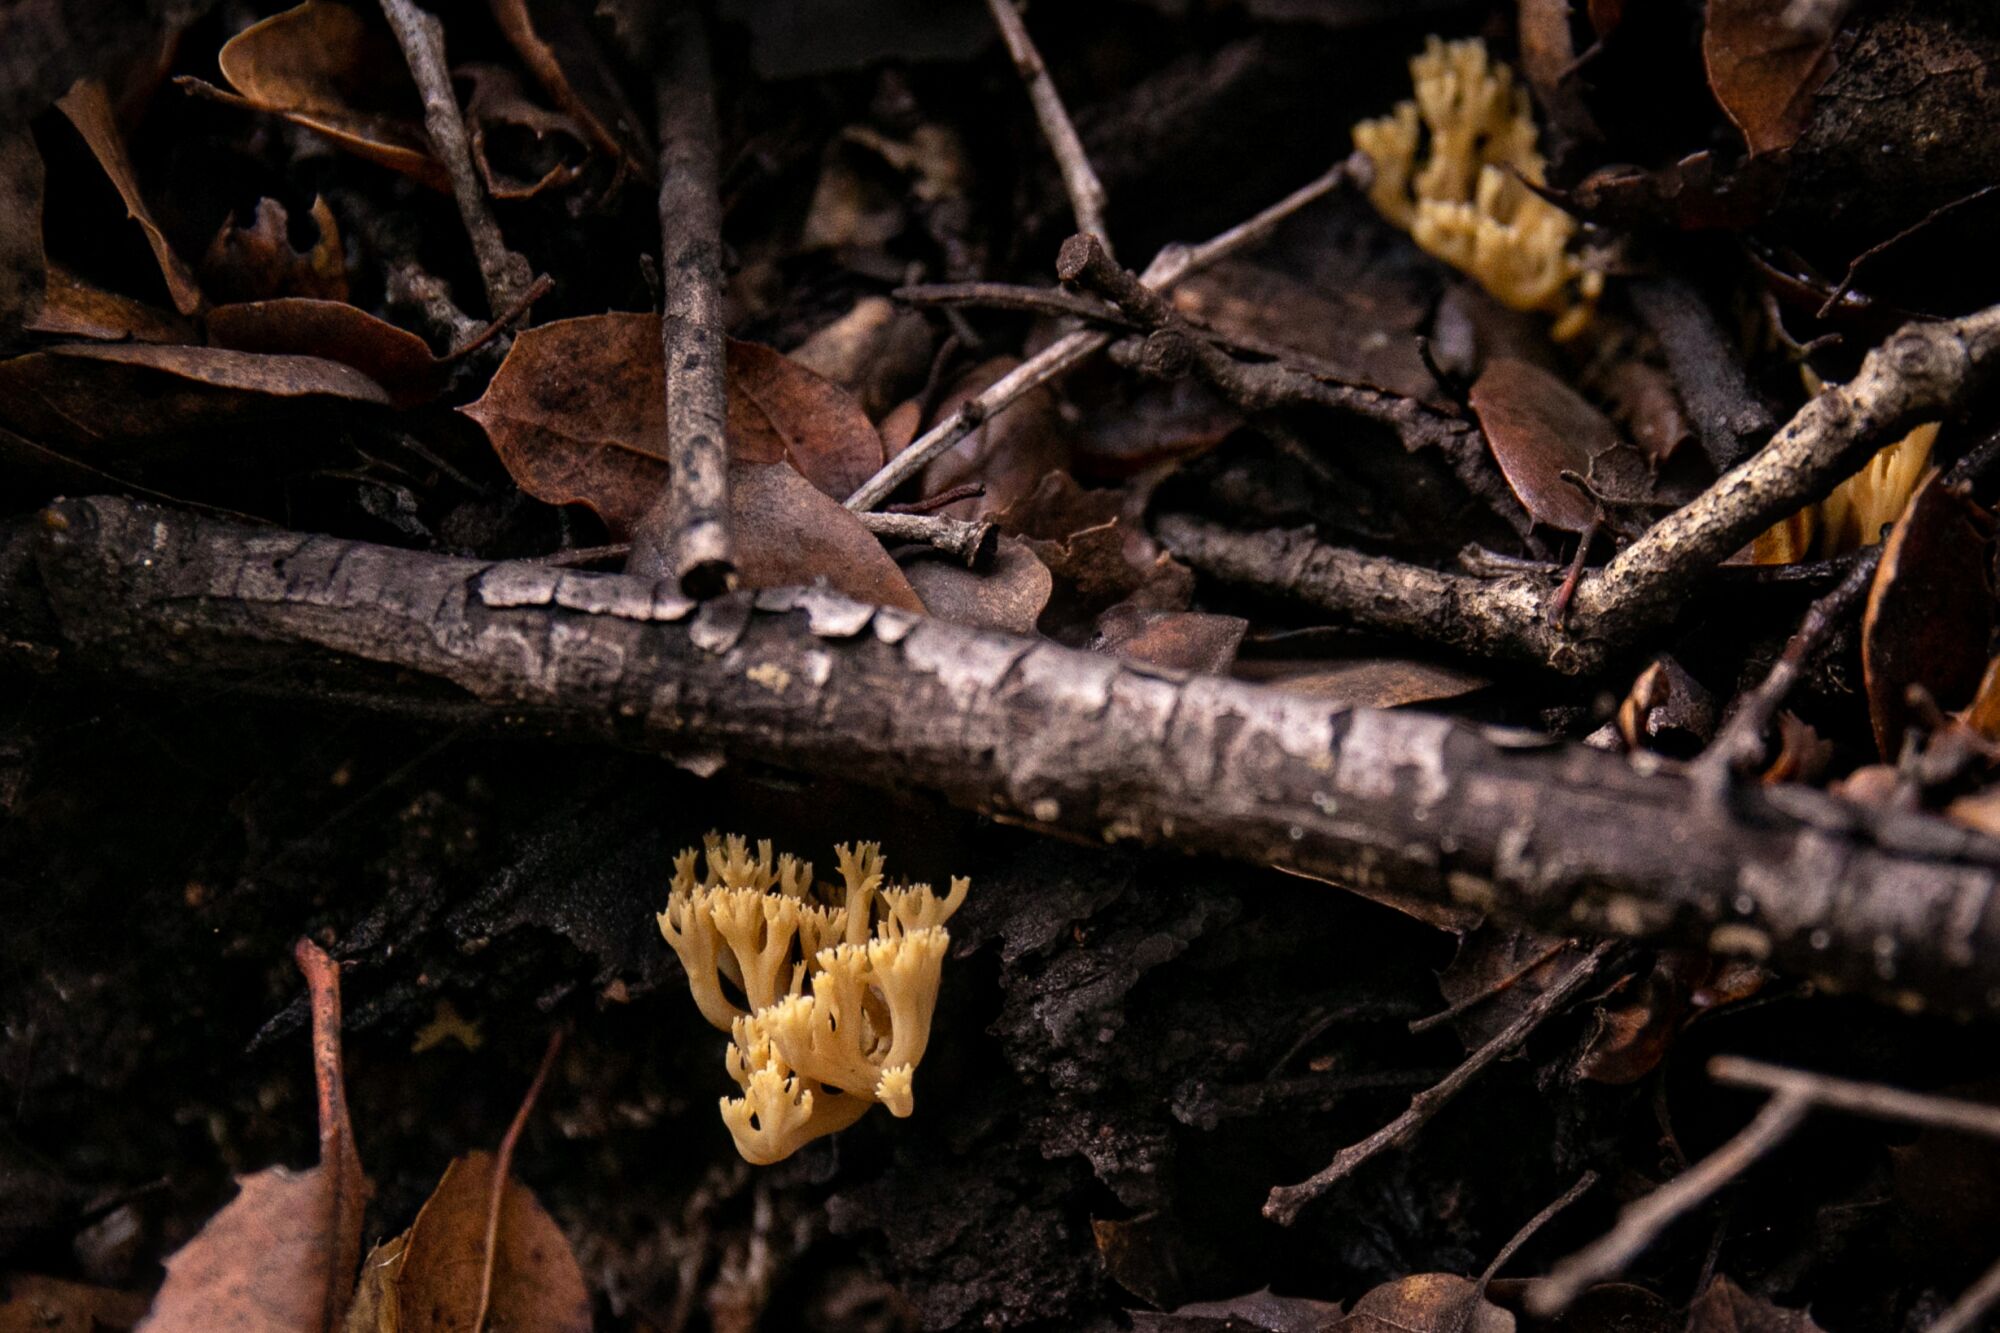 Yellow mushrooms growing on a fallen tree branch in Canyon View Park.